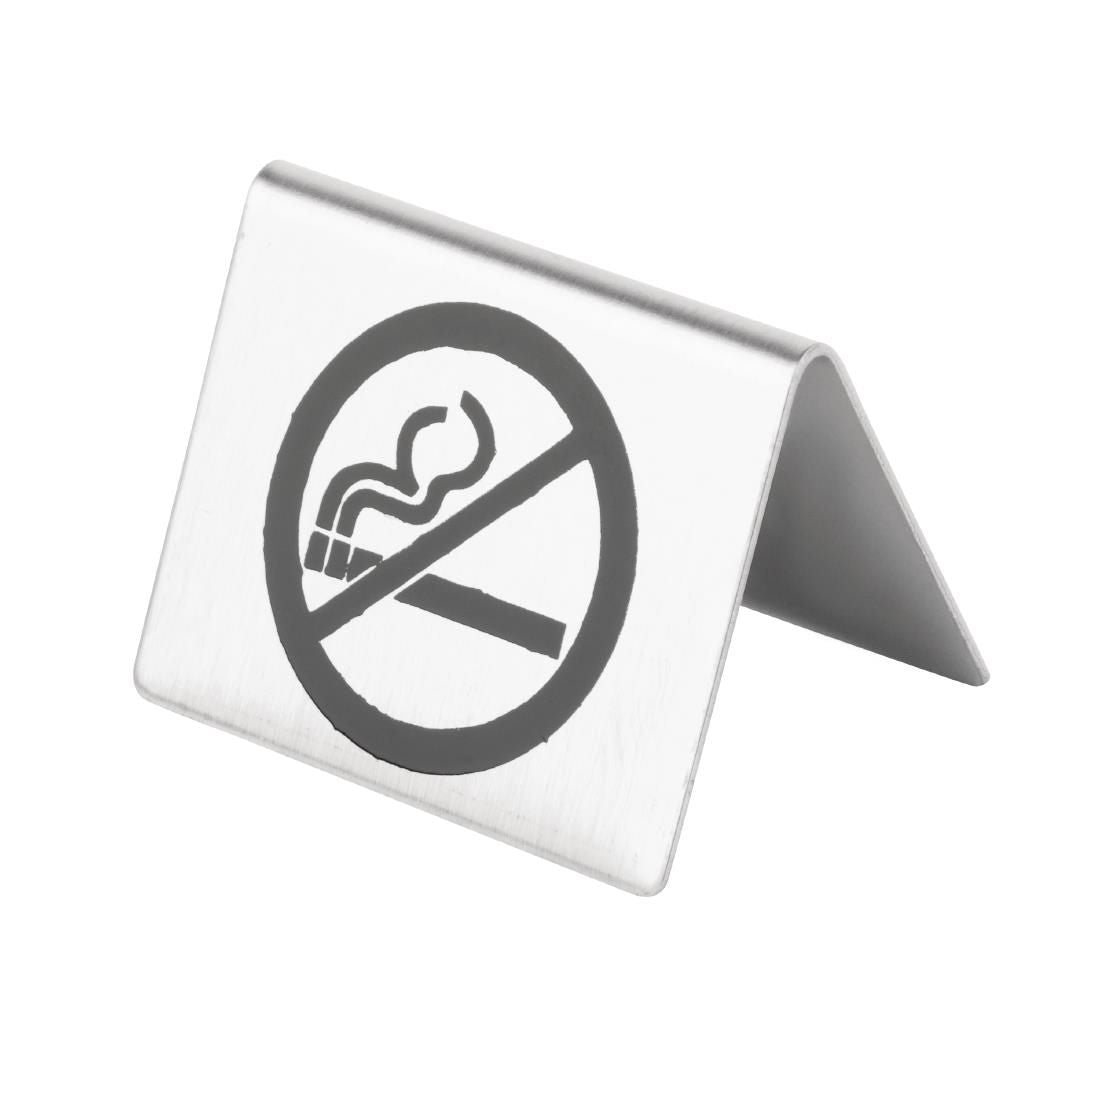 Brushed Steel No Smoking Table Sign JD Catering Equipment Solutions Ltd